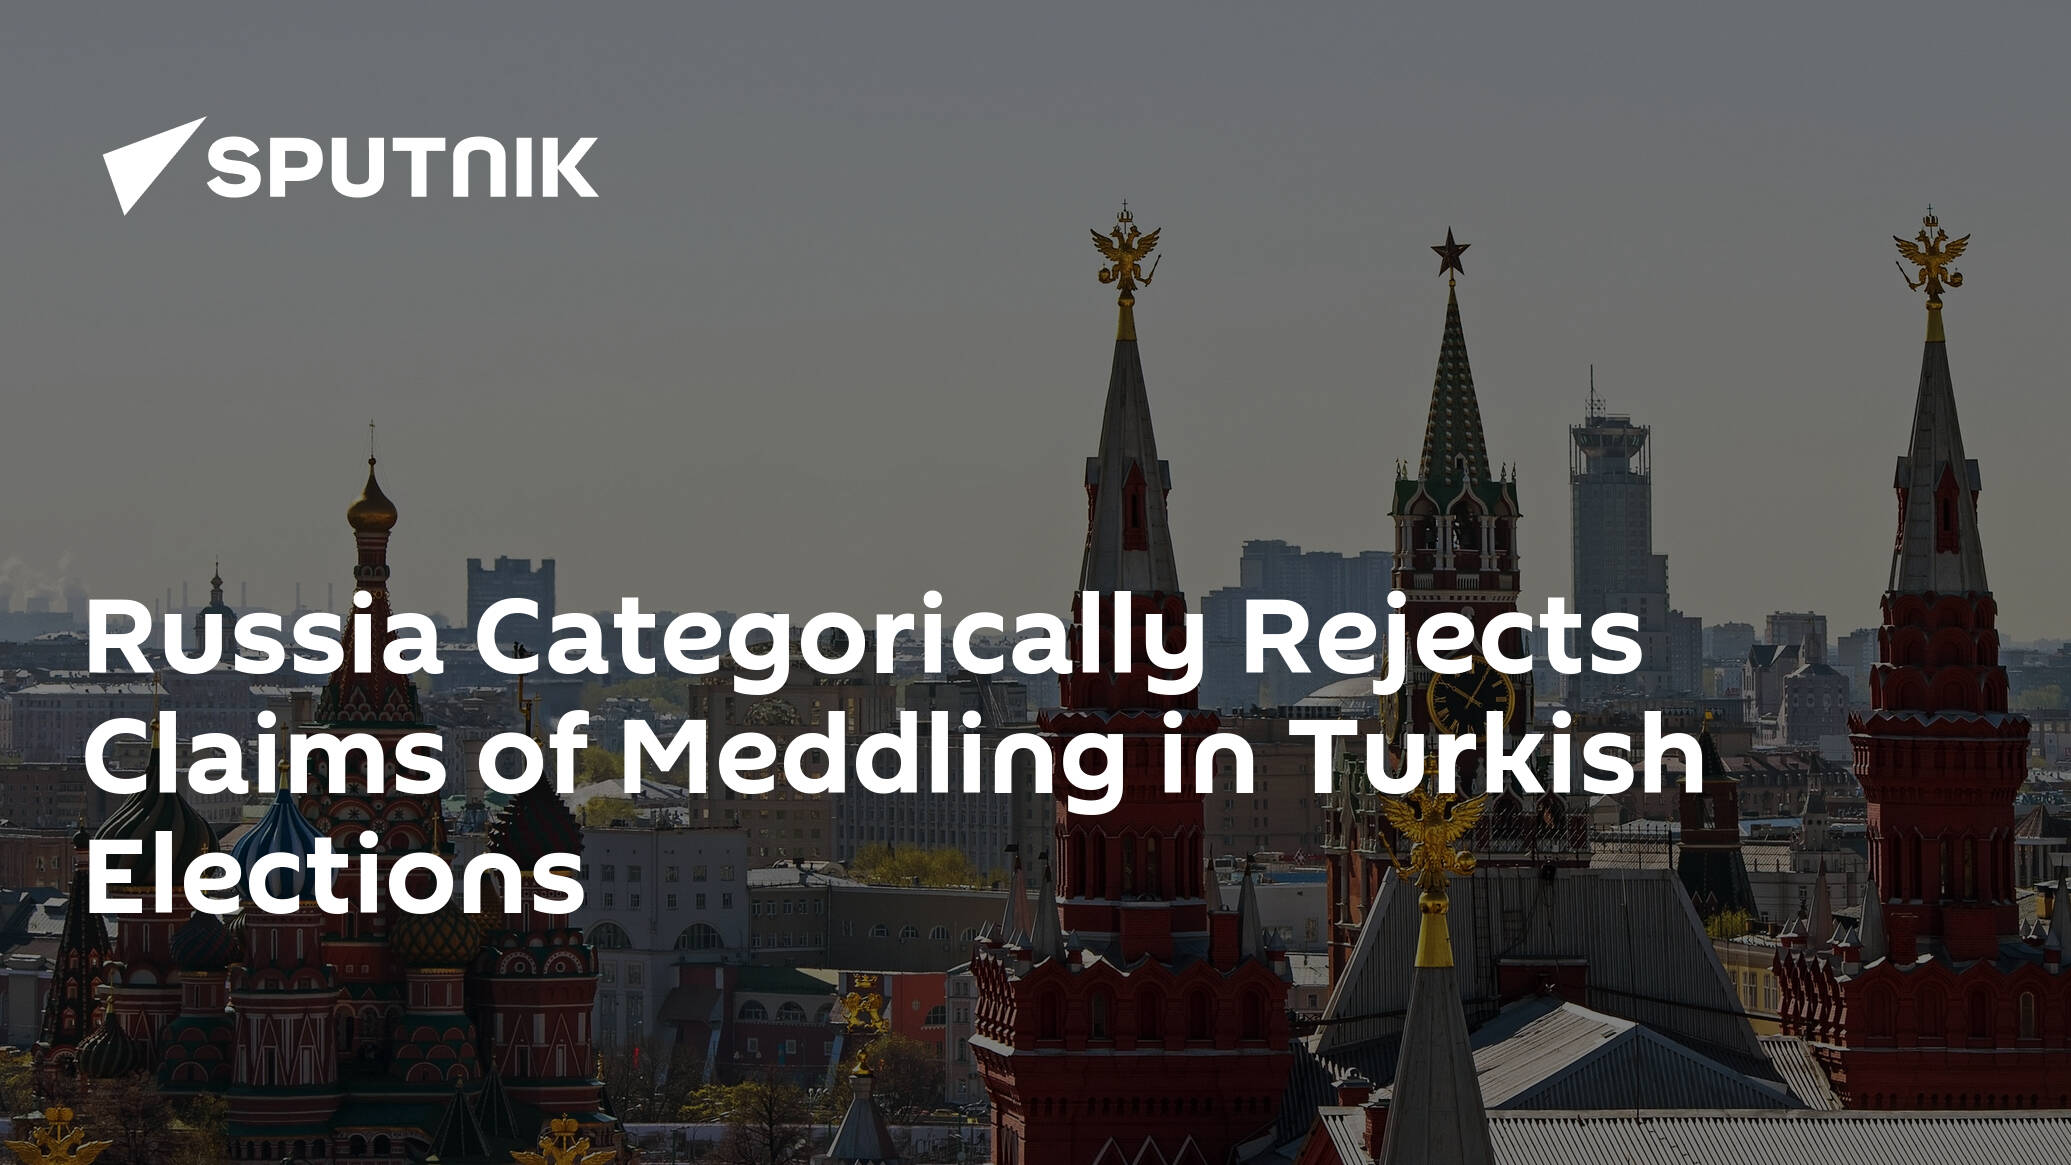 Russia Categorically Rejects Claims of Meddling in Turkish Elections